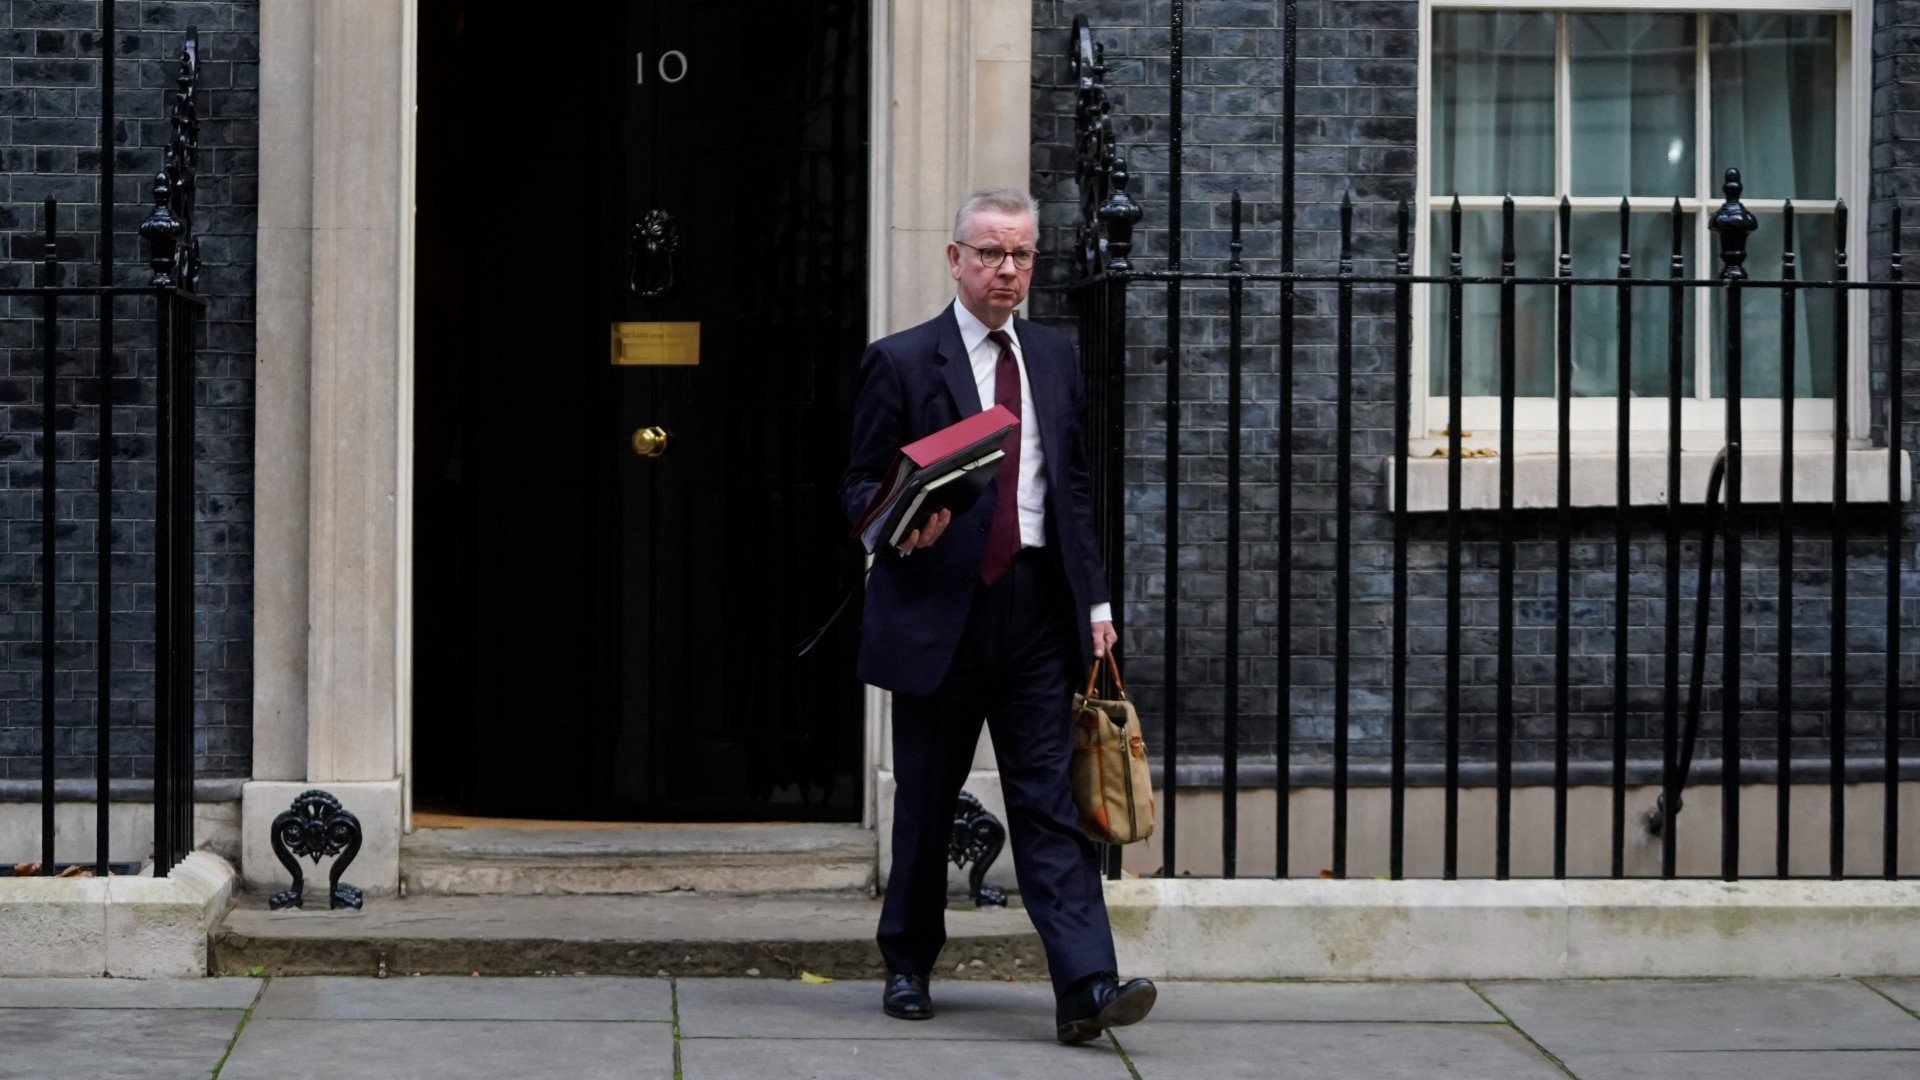 The Economic Activity of Public Bodies bill will be presented to parliament by Communities Secretary Michael Gove (AFP/File photo)